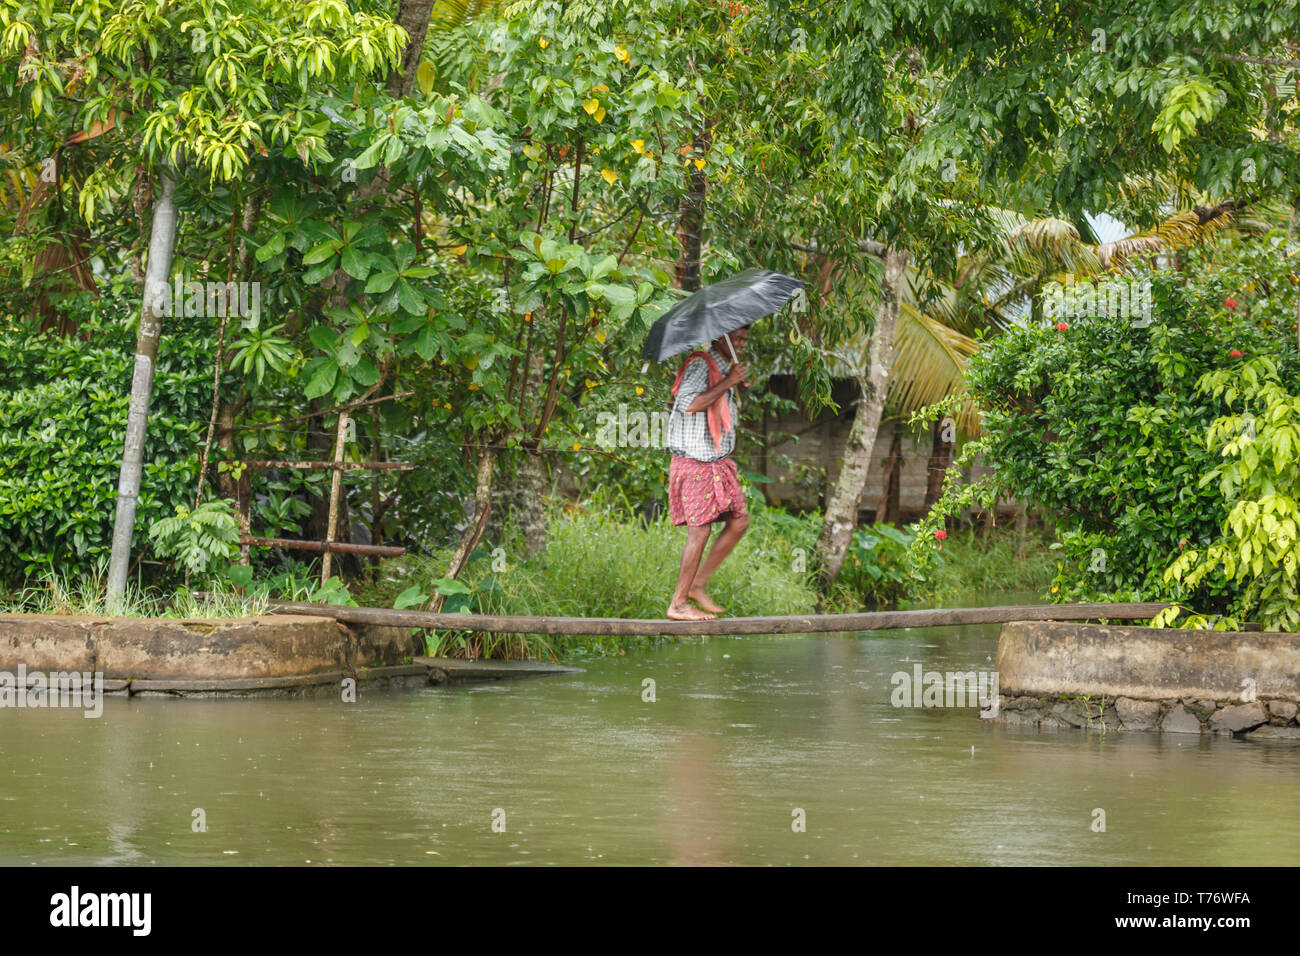 Barefoot child with umbrella crosses creek on a narrow board on way home from school in jungle town of Alleppey, India Stock Photo